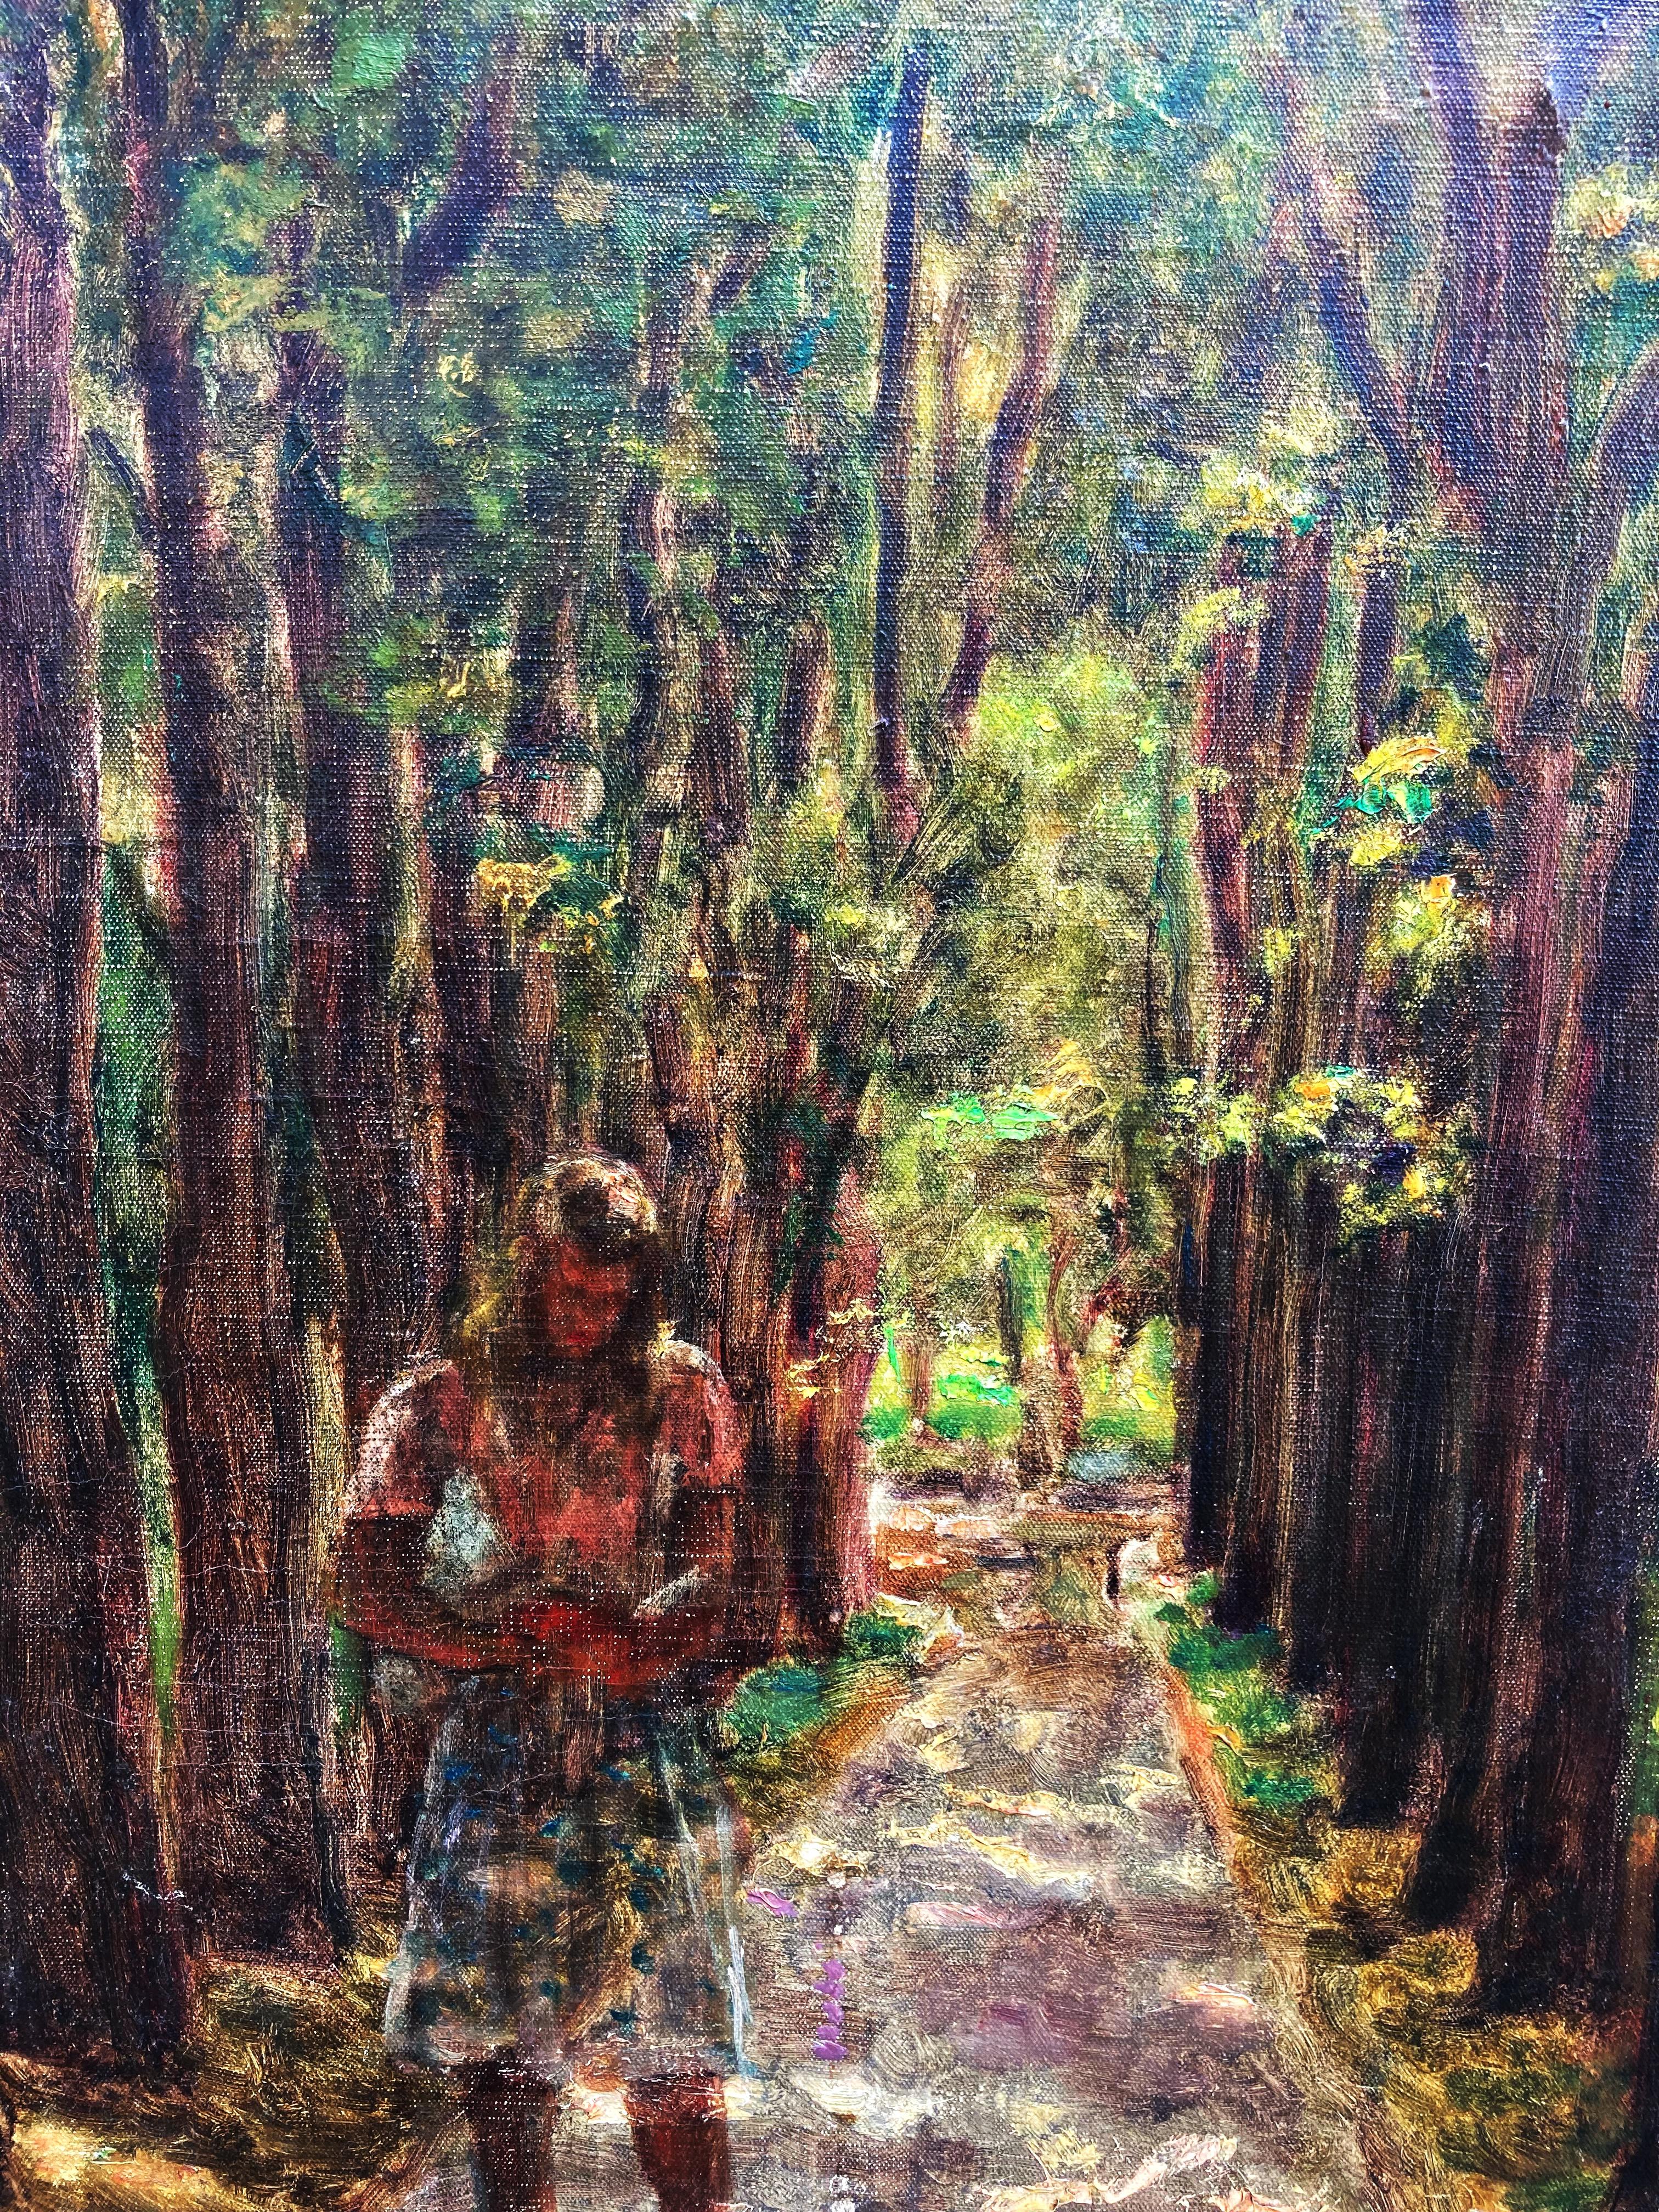 A Path Through the Woods (Impressionist Oil on Canvas) - Painting by Unknown